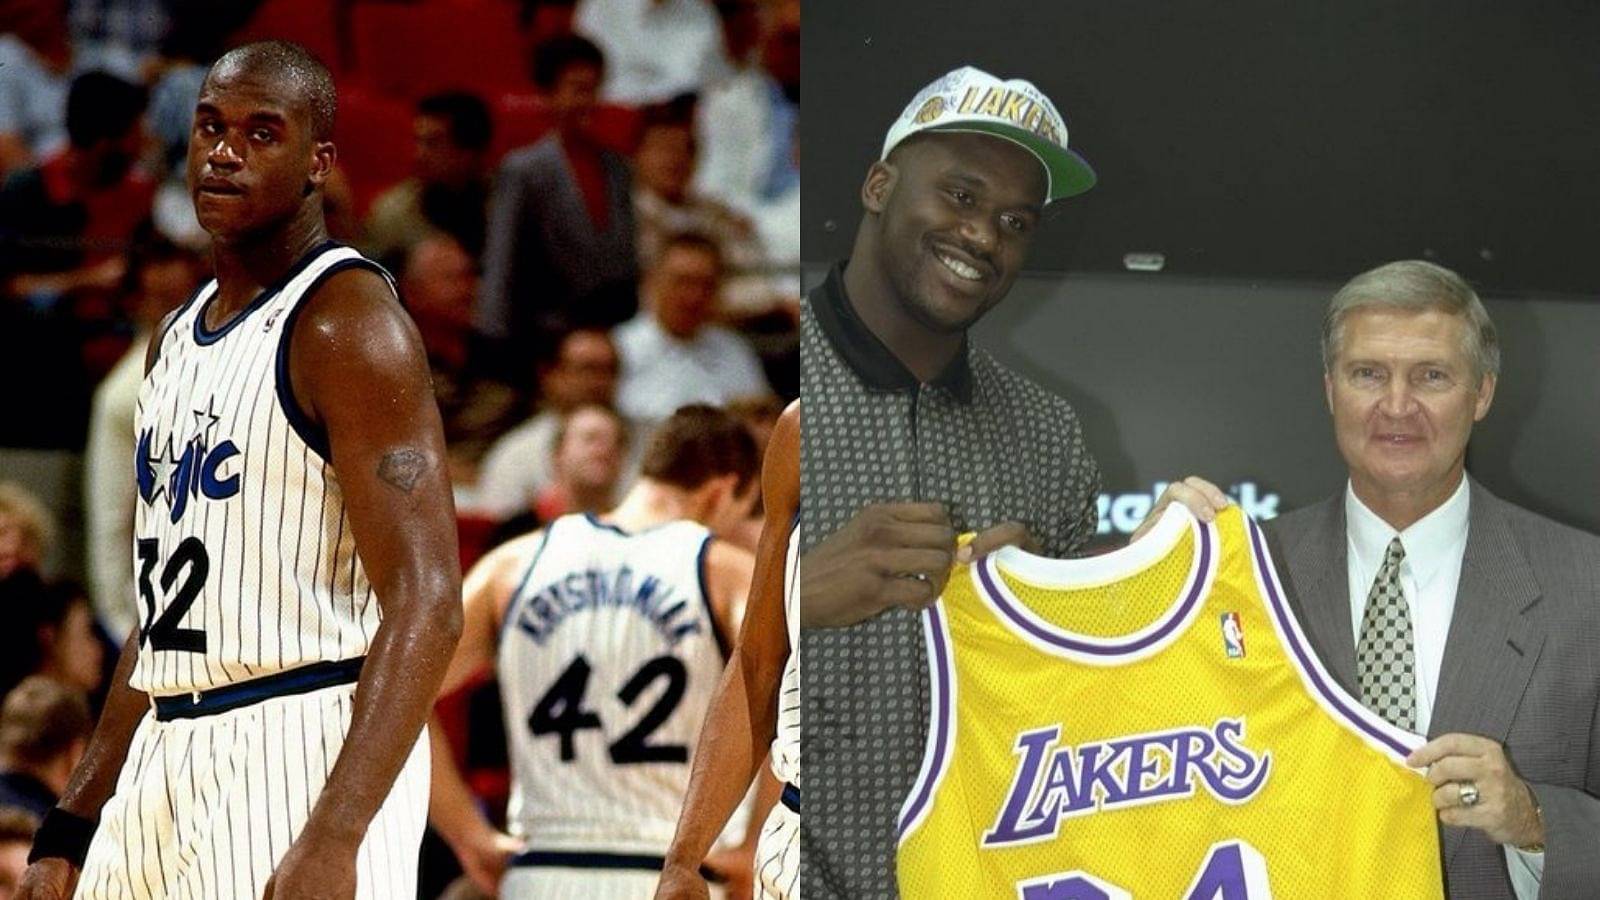 “Shaquille O’Neal is not worthy of $115 million contract”: Future 3x Finals MVP with Lakers was not wanted by 91% of voters in a poll in 1996